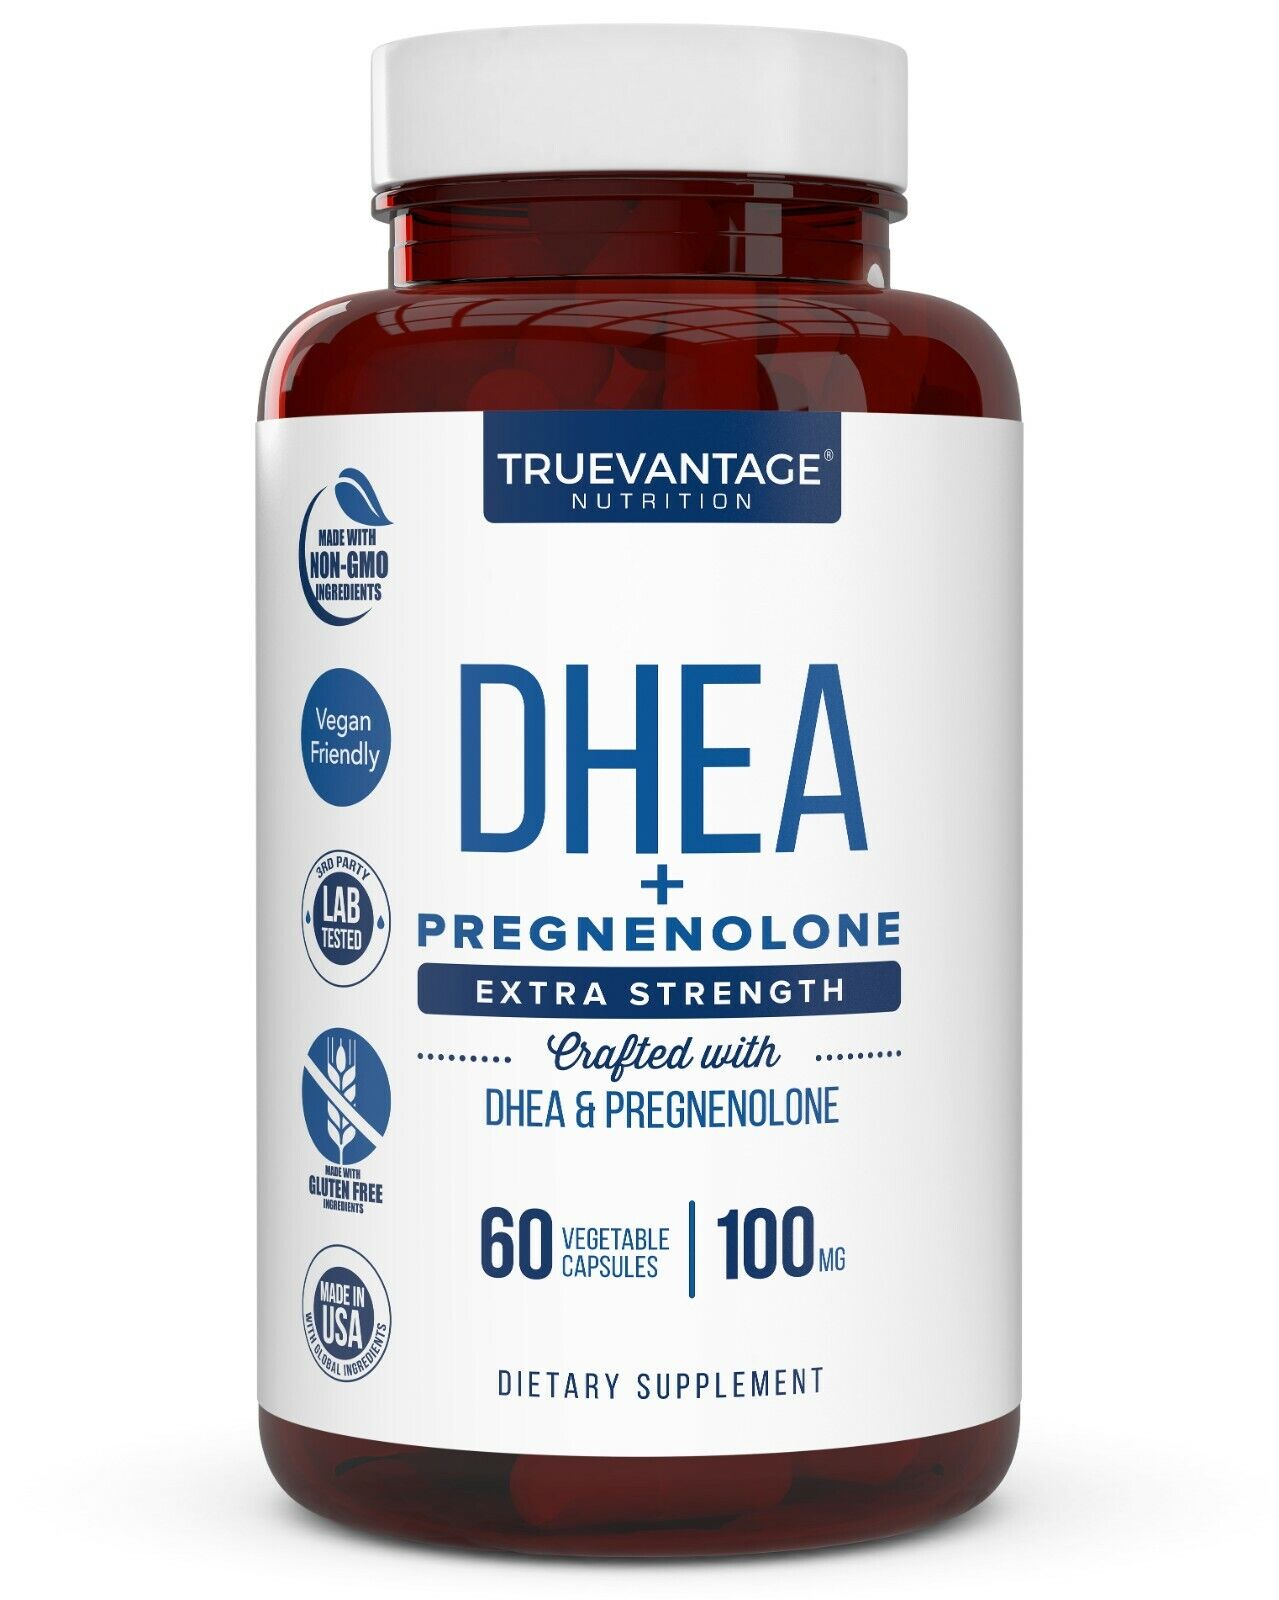 Dhea 100mg Supplement With Pregnenolone 60mg